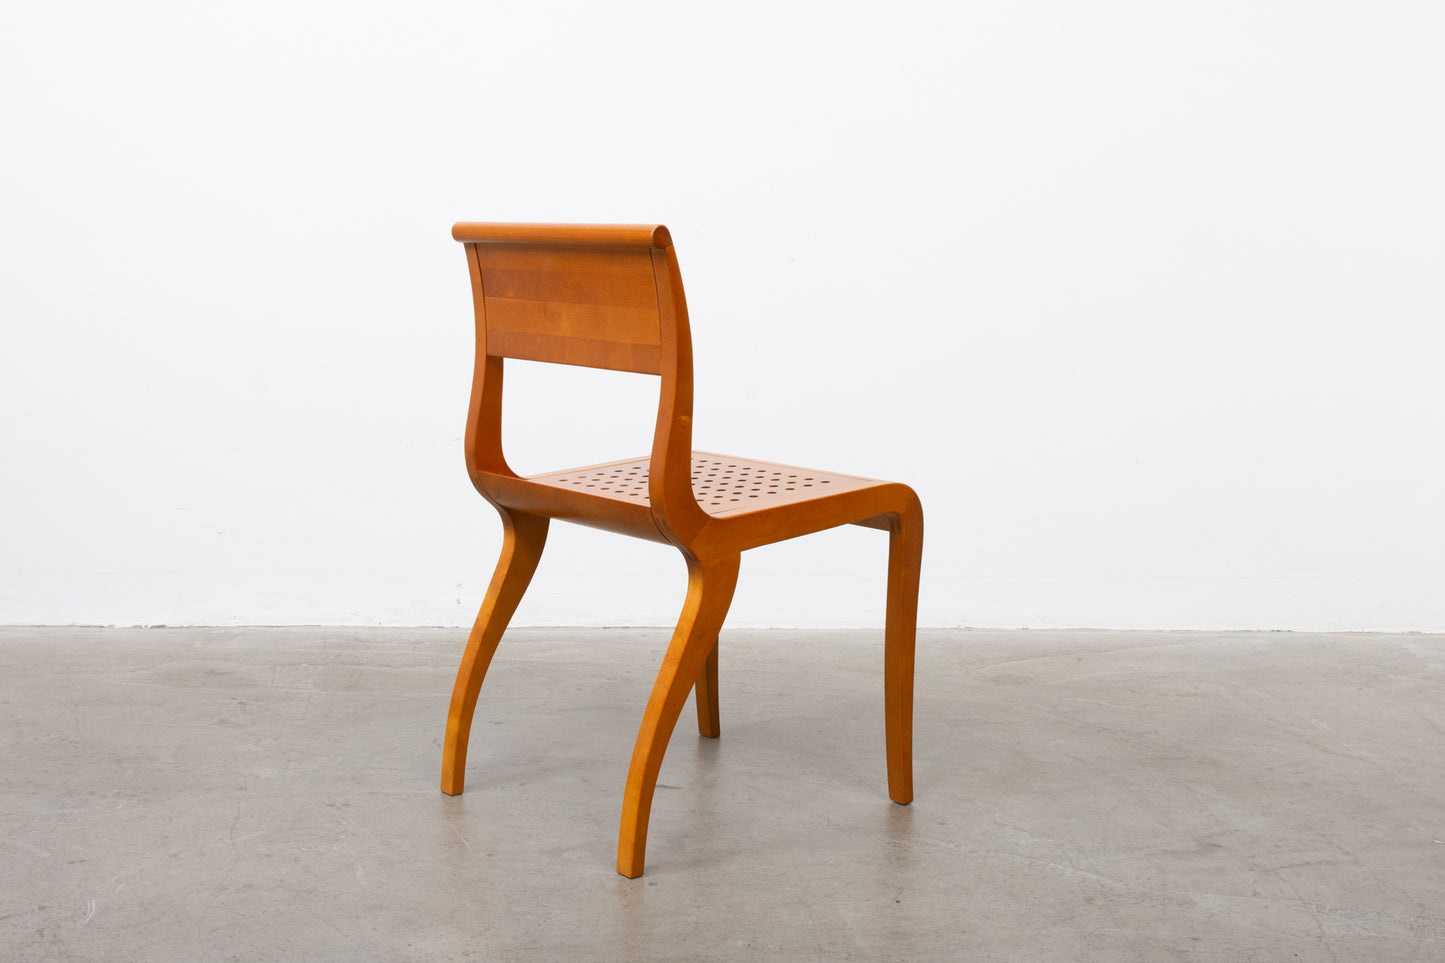 Four available: 1980s birch dining chairs by Kimmo Varjoranta